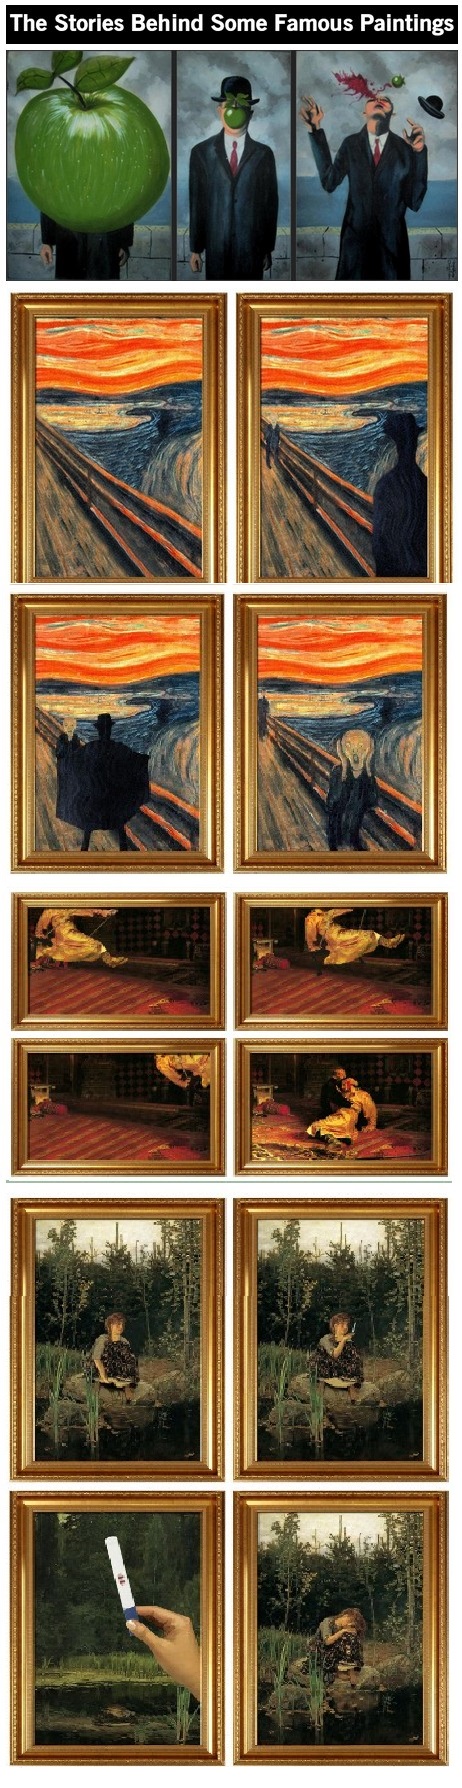 The Scream was my favorite